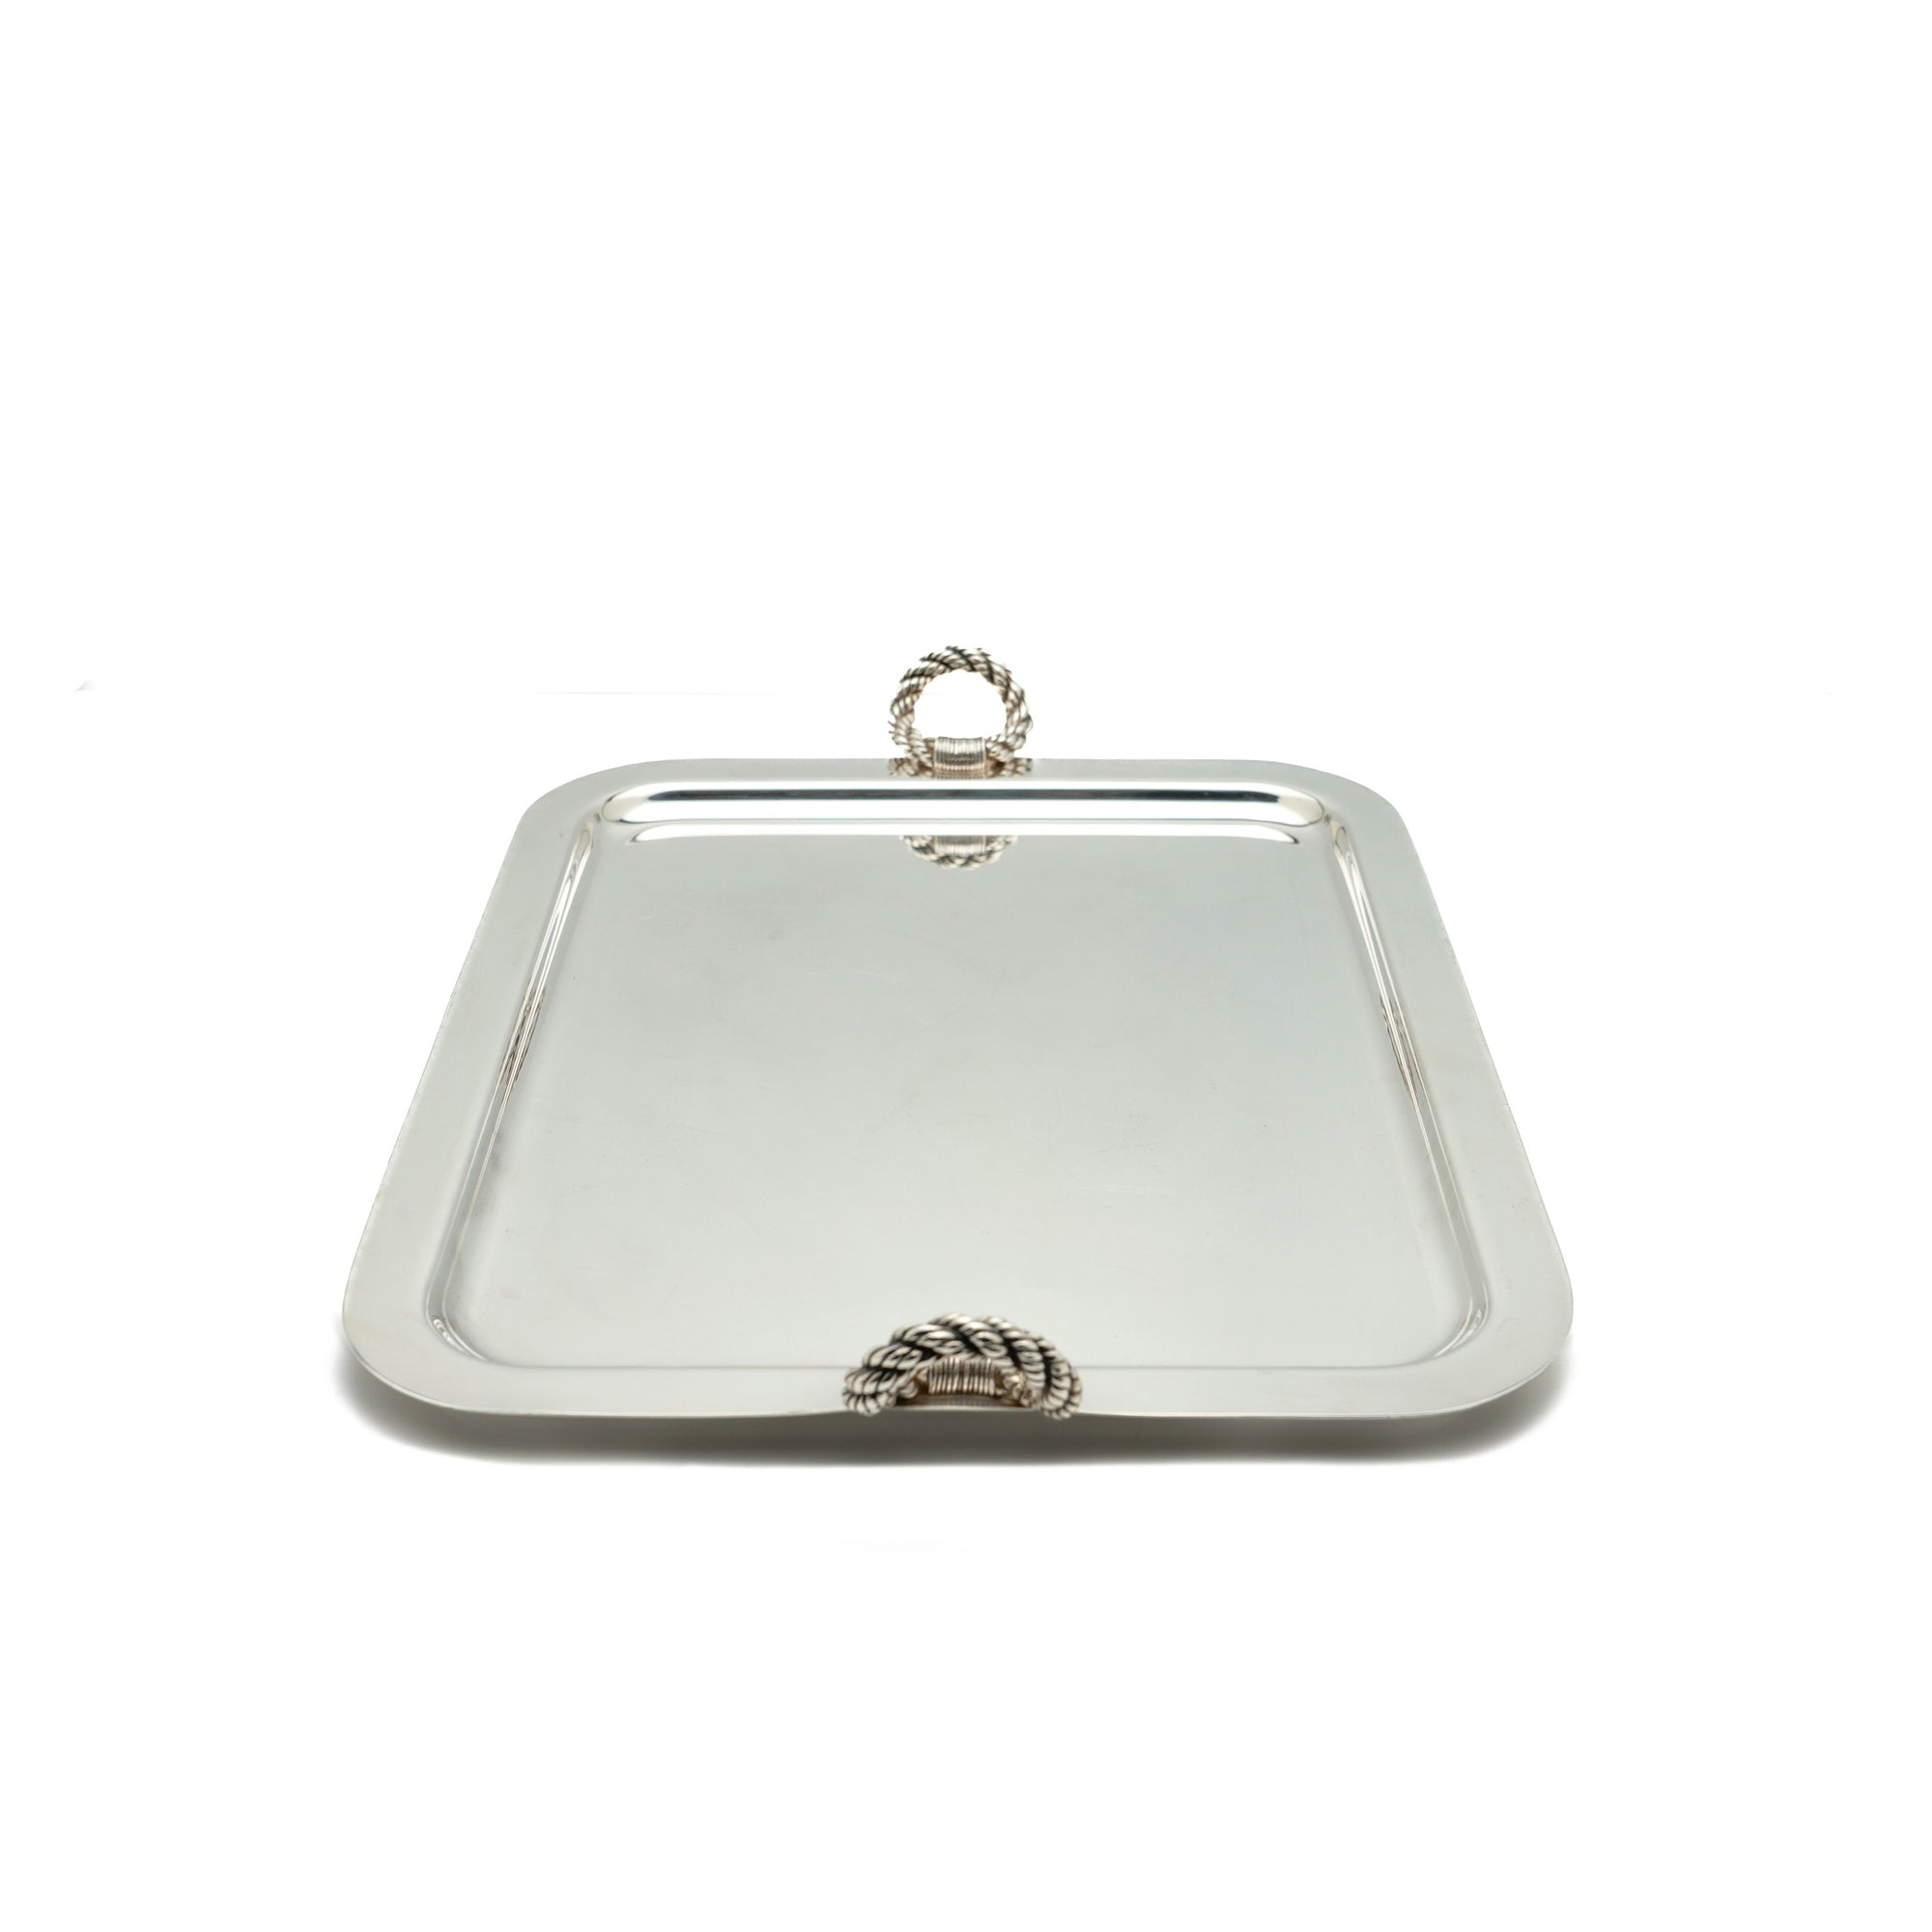 Hermes ‘Rope’ Tray